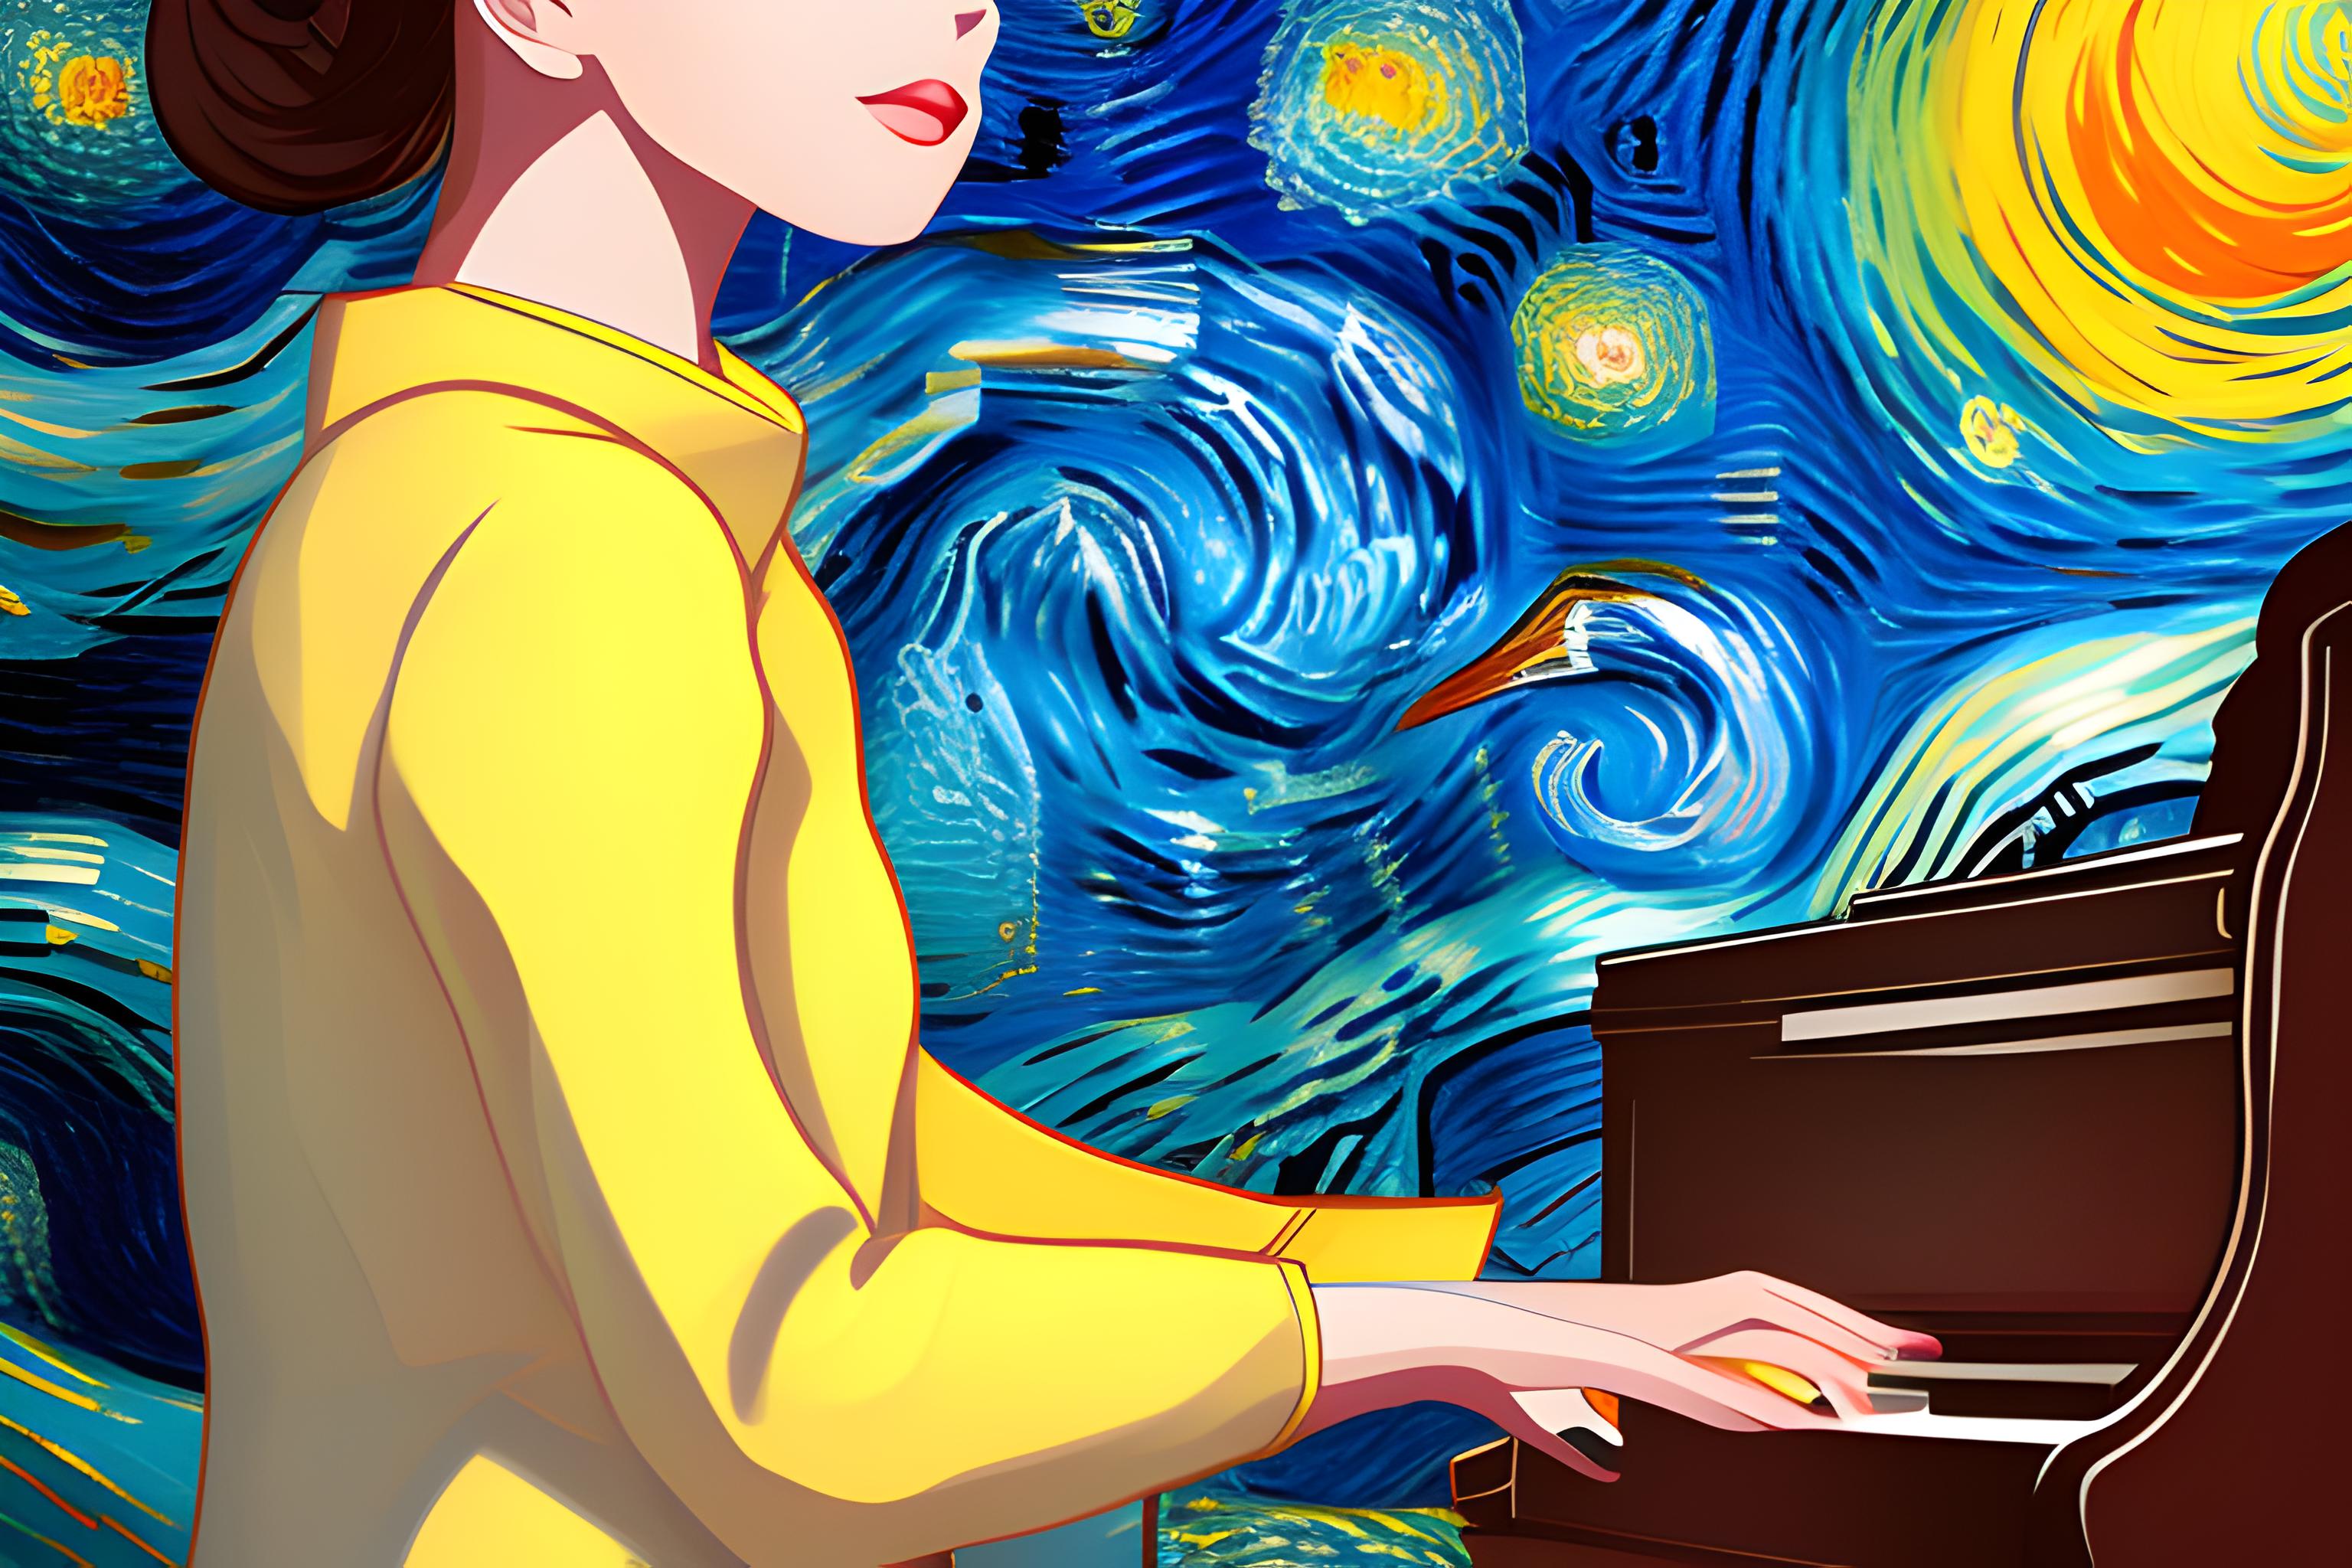 anime girl Playing the Piano instru... - OpenDream